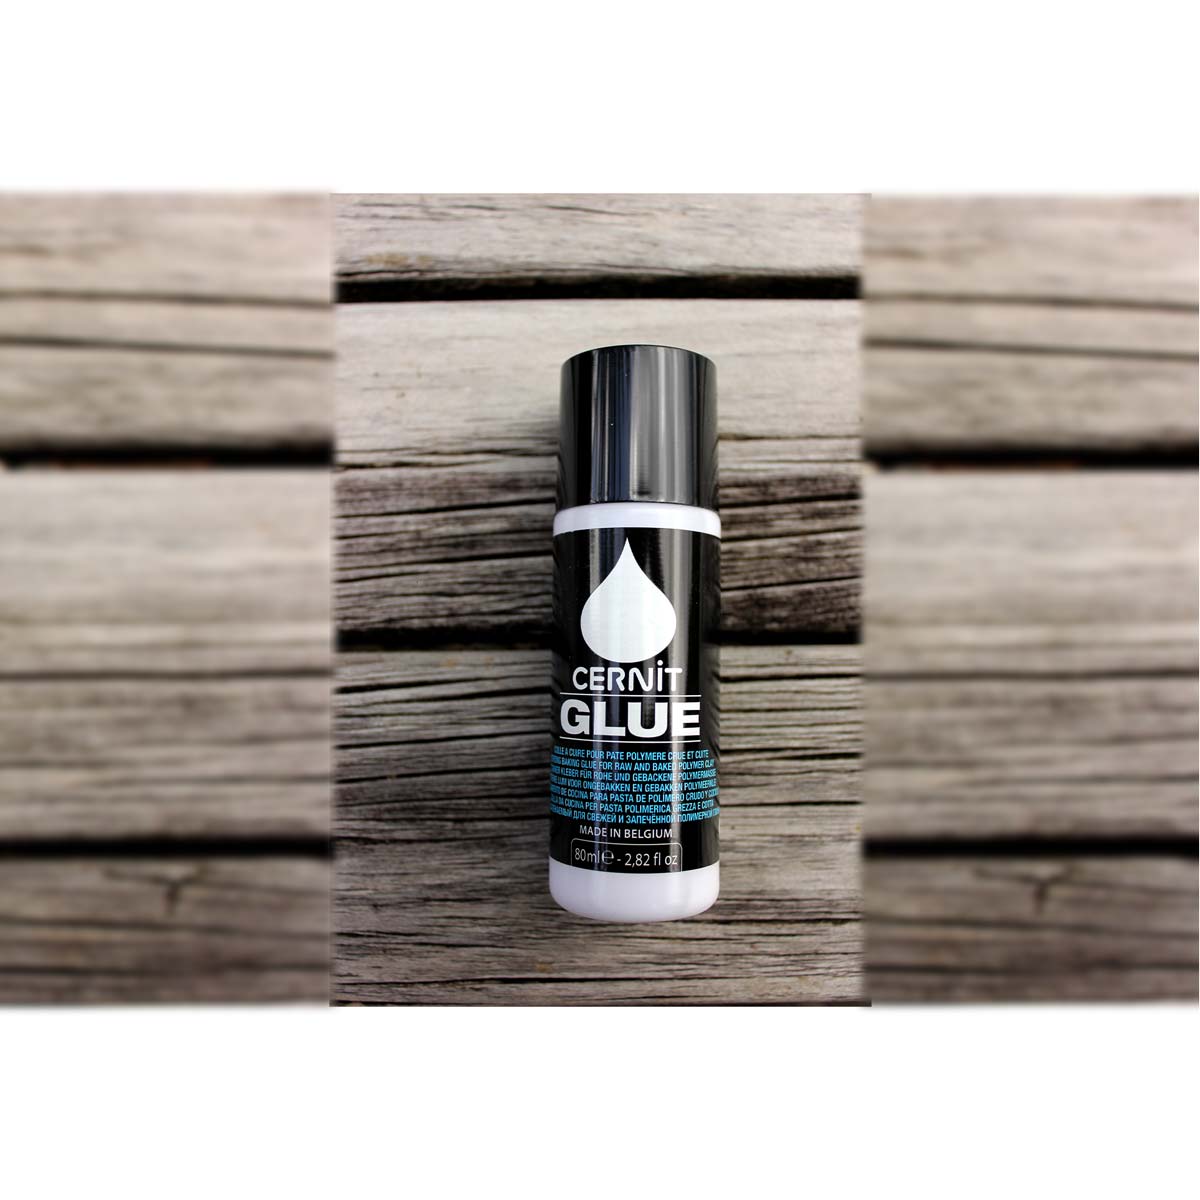 Cernit Glue 80ml. Strong Glue for Raw and Baked Polymer Clay, Must Be  Baked. Cernit Glue 